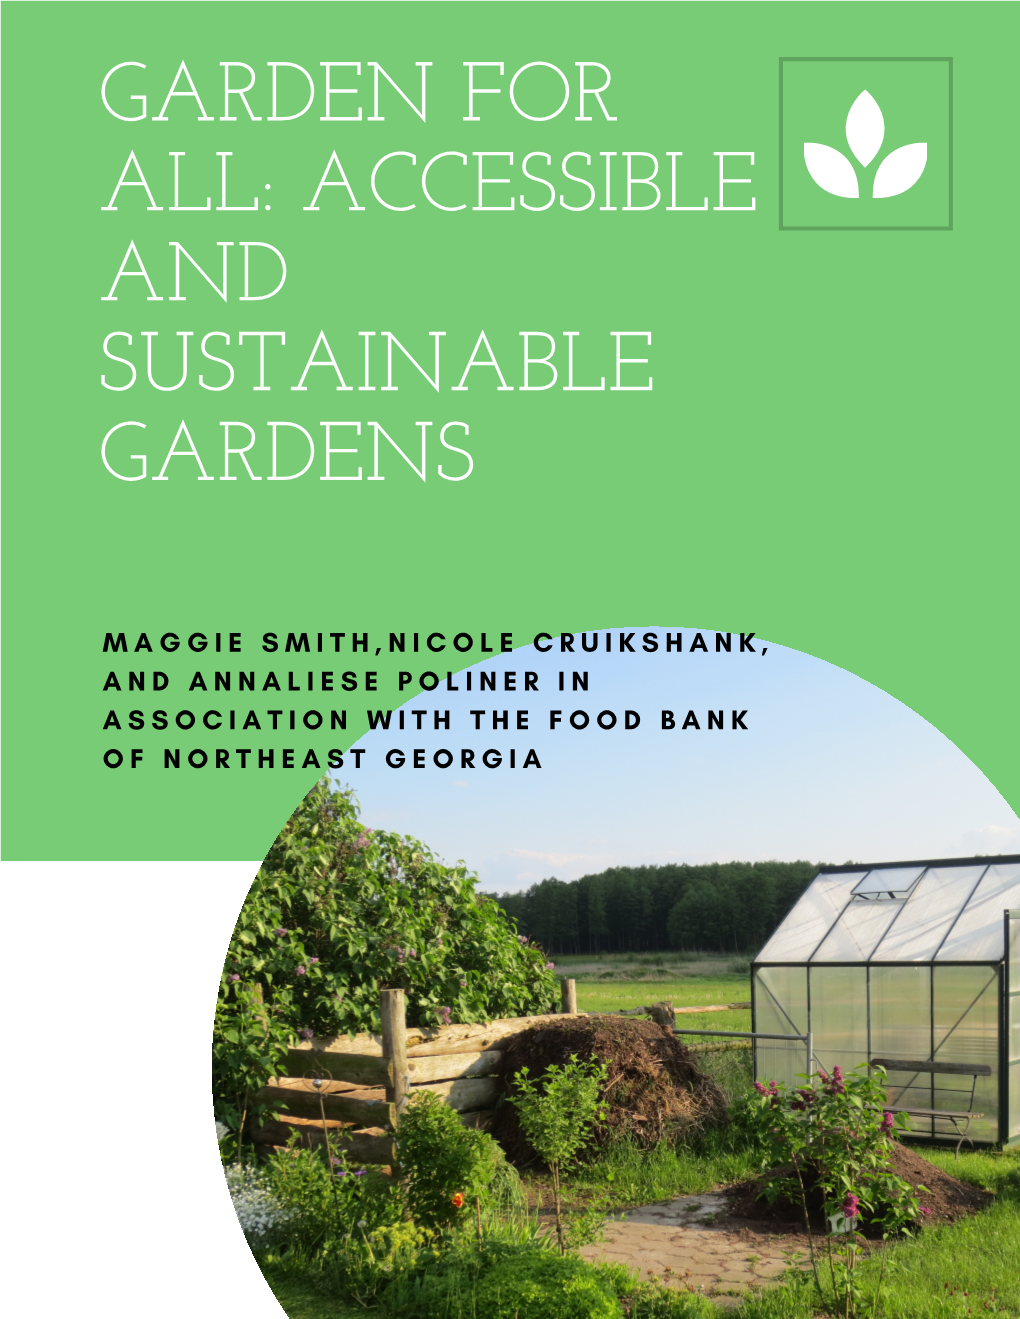 Accessible and Sustainable Gardens